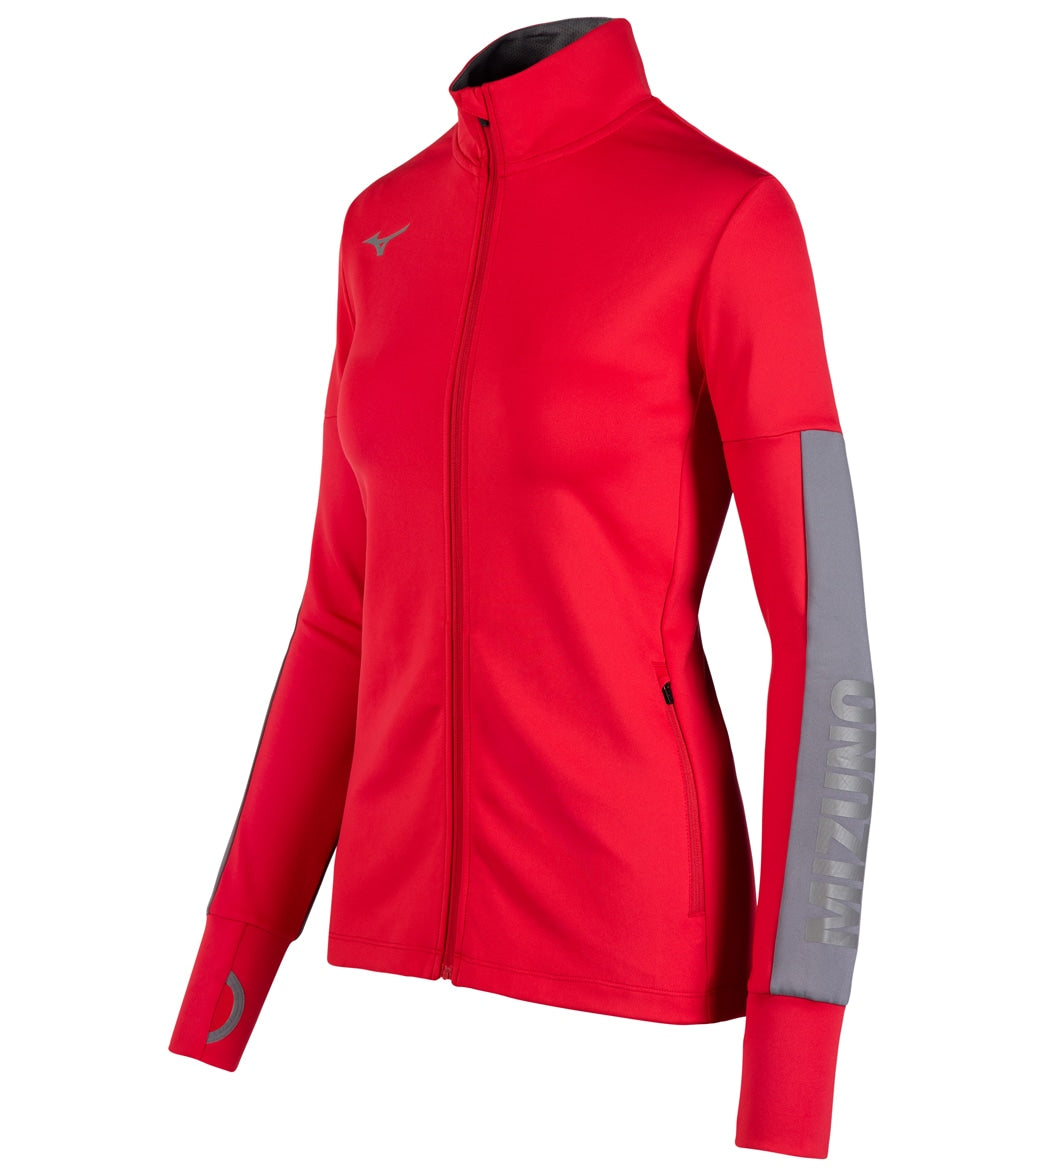 Mizuno Women's Alpha Quest Jacket - Red/Shade Large - Swimoutlet.com